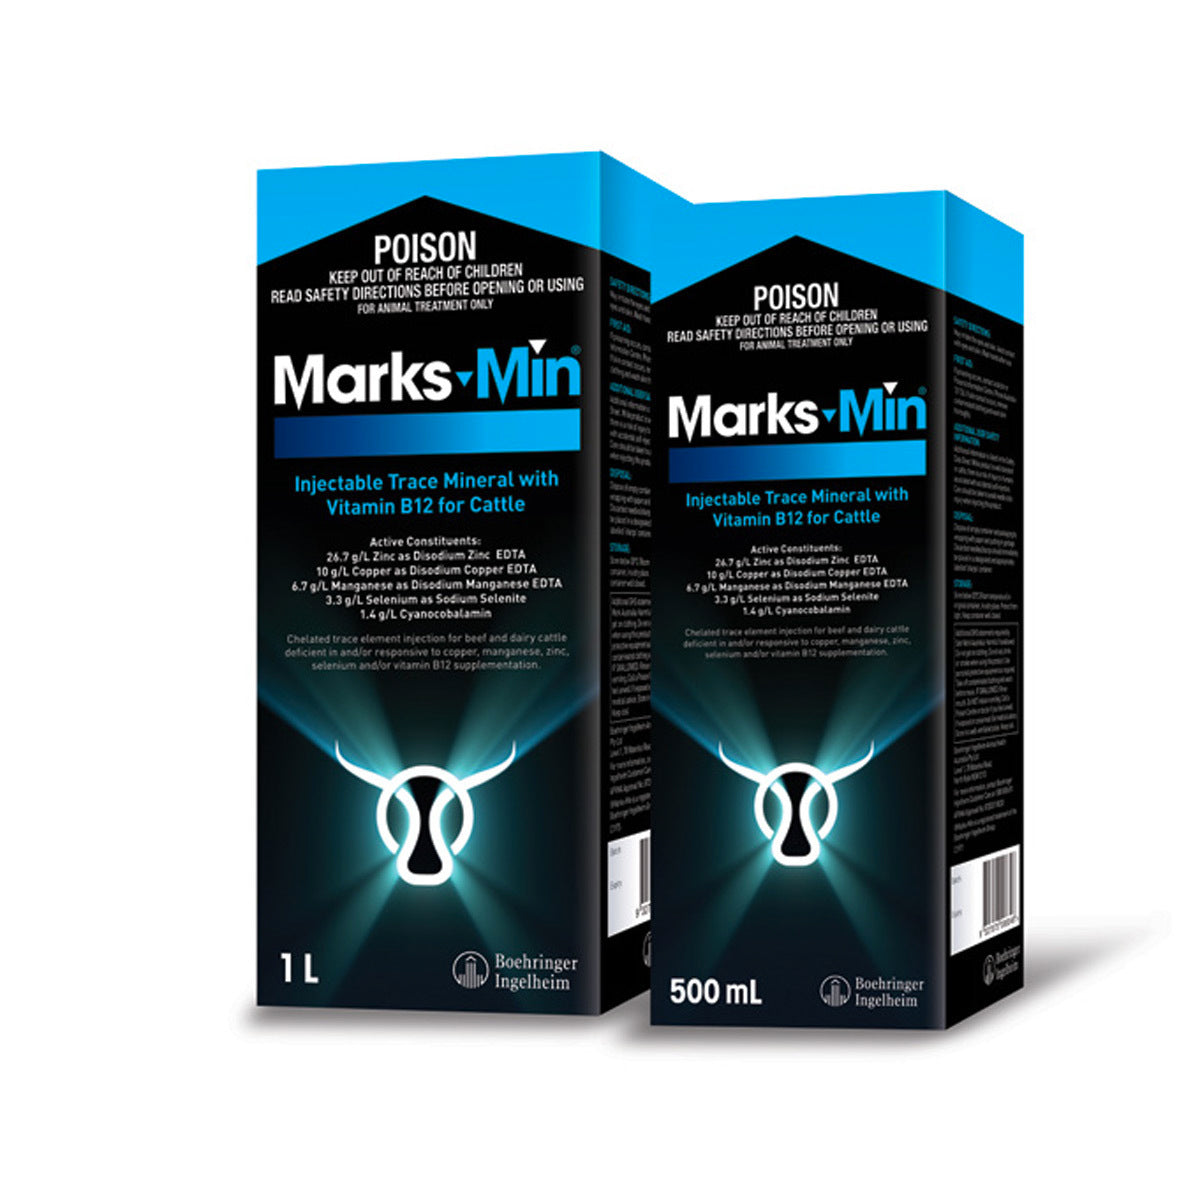 Marks-Min Injectable Trace Mineral with Vitamin B12 for Cattle